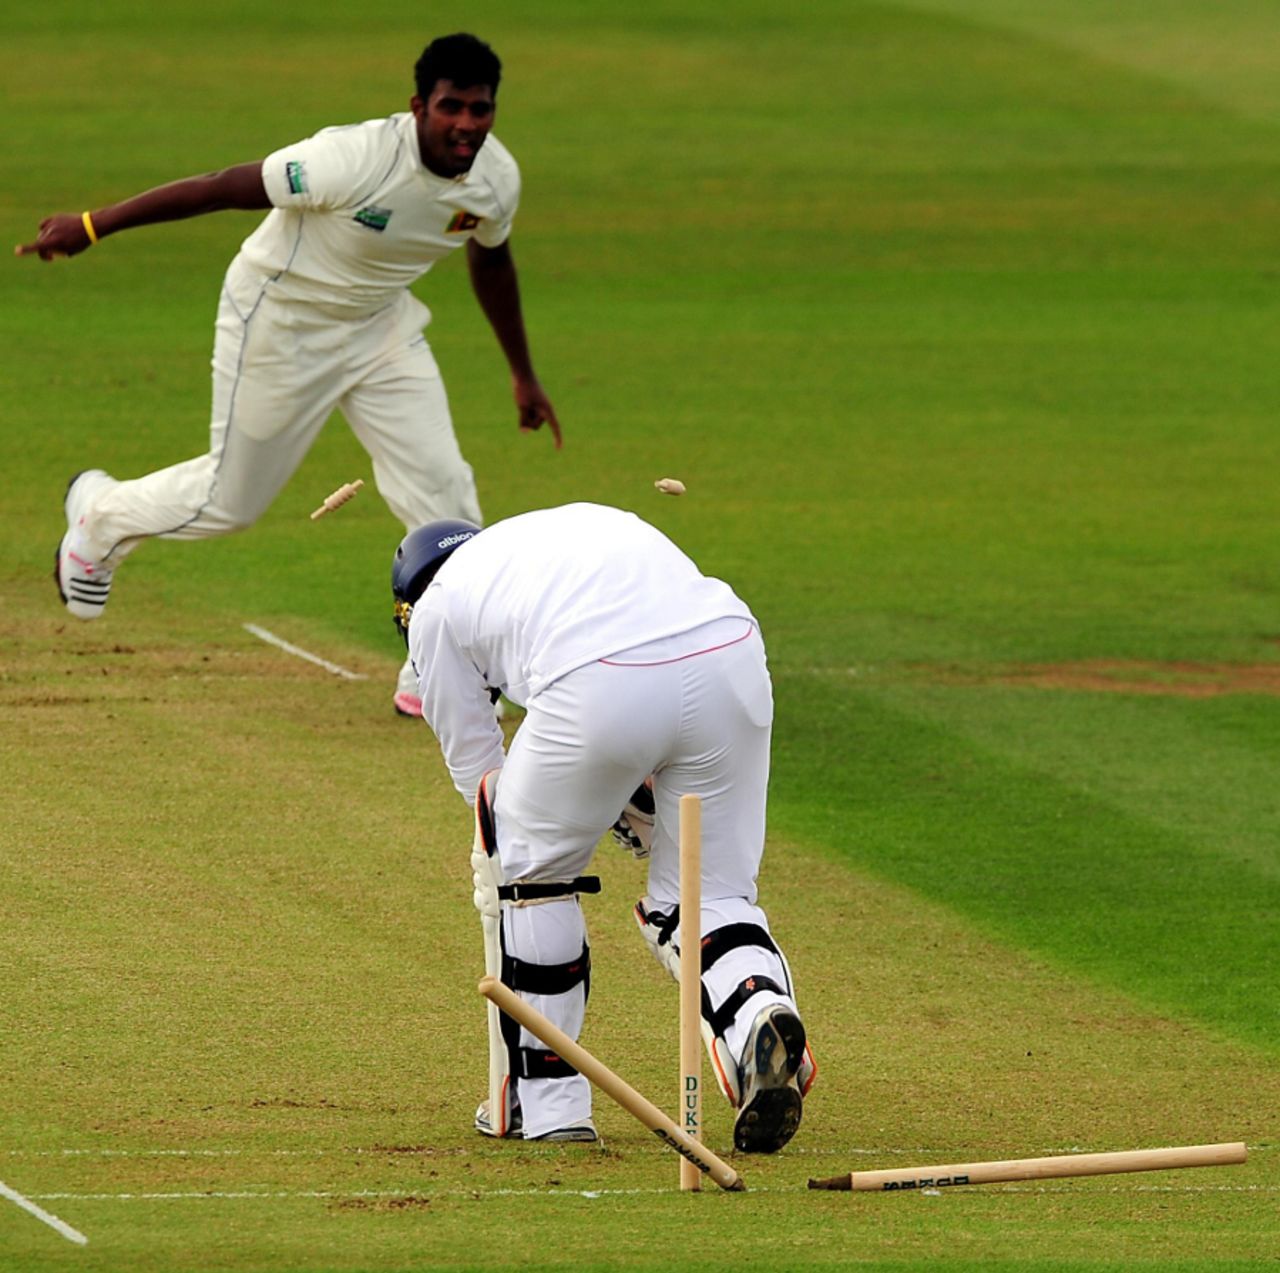 Jimmy Adams was bowled early by Thisara Perera, England Lions v Sri Lankans, Tour match, Derby, May 19 2011